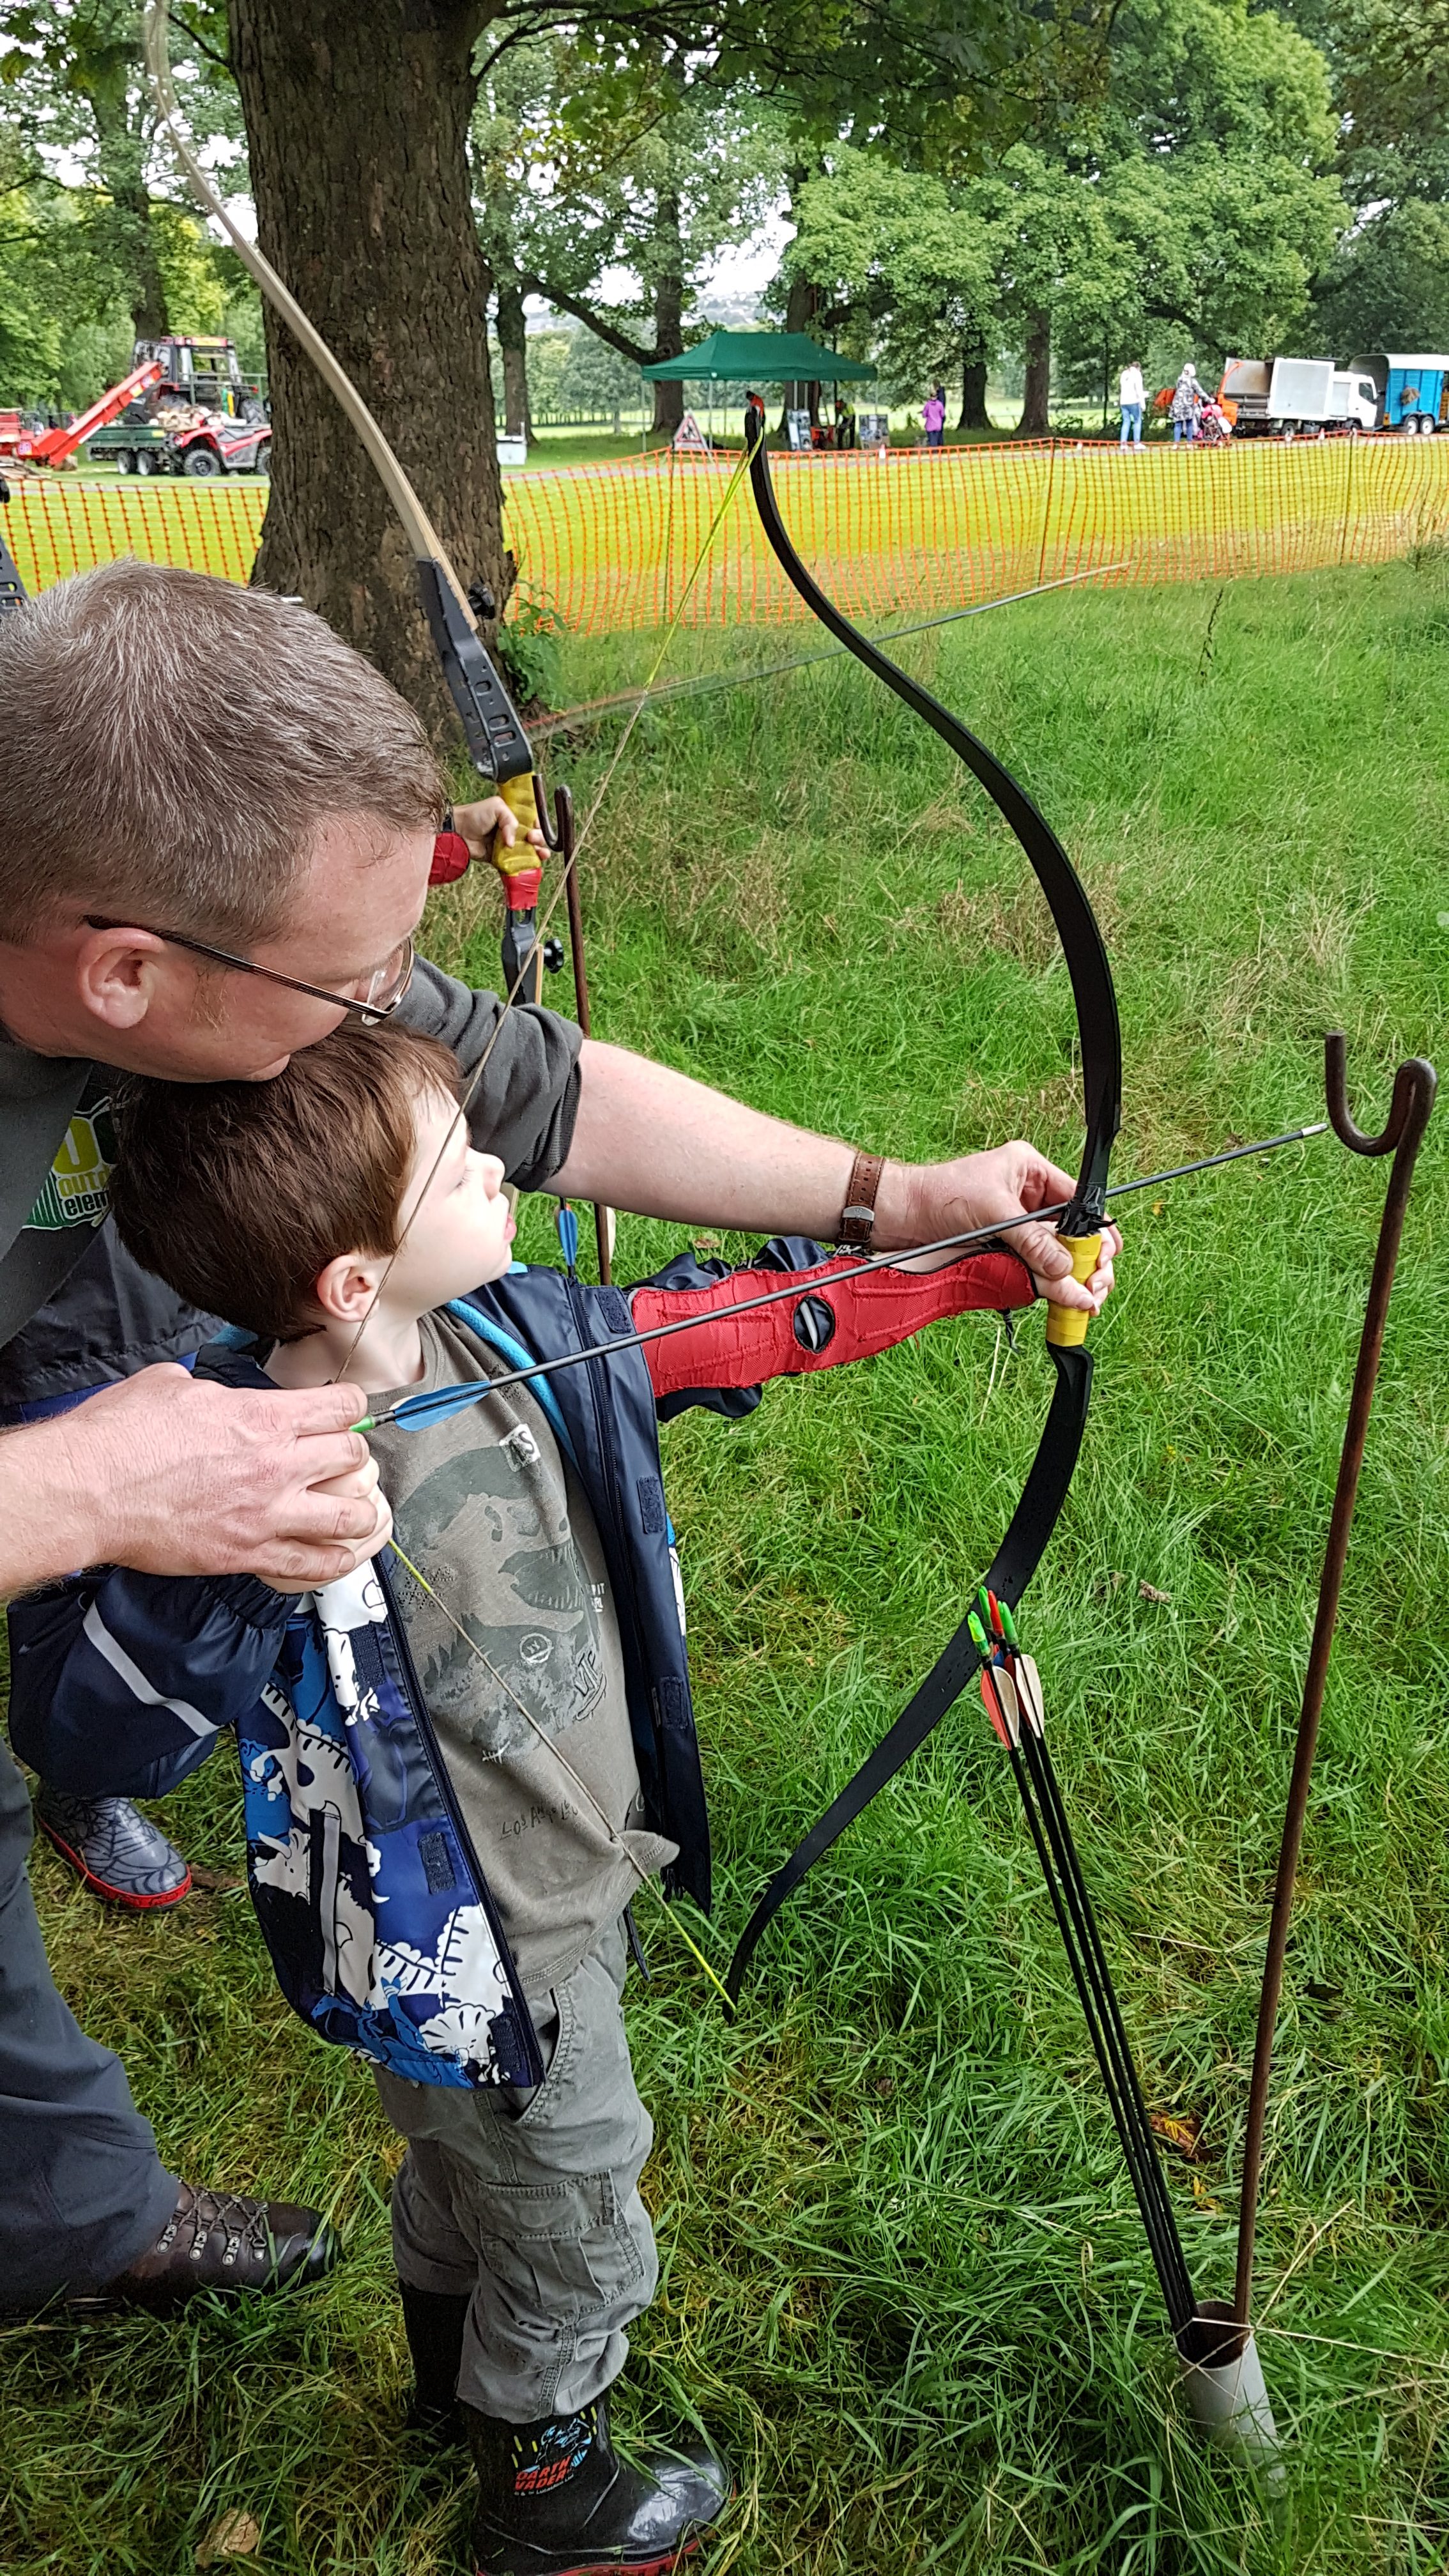 Archery tuition